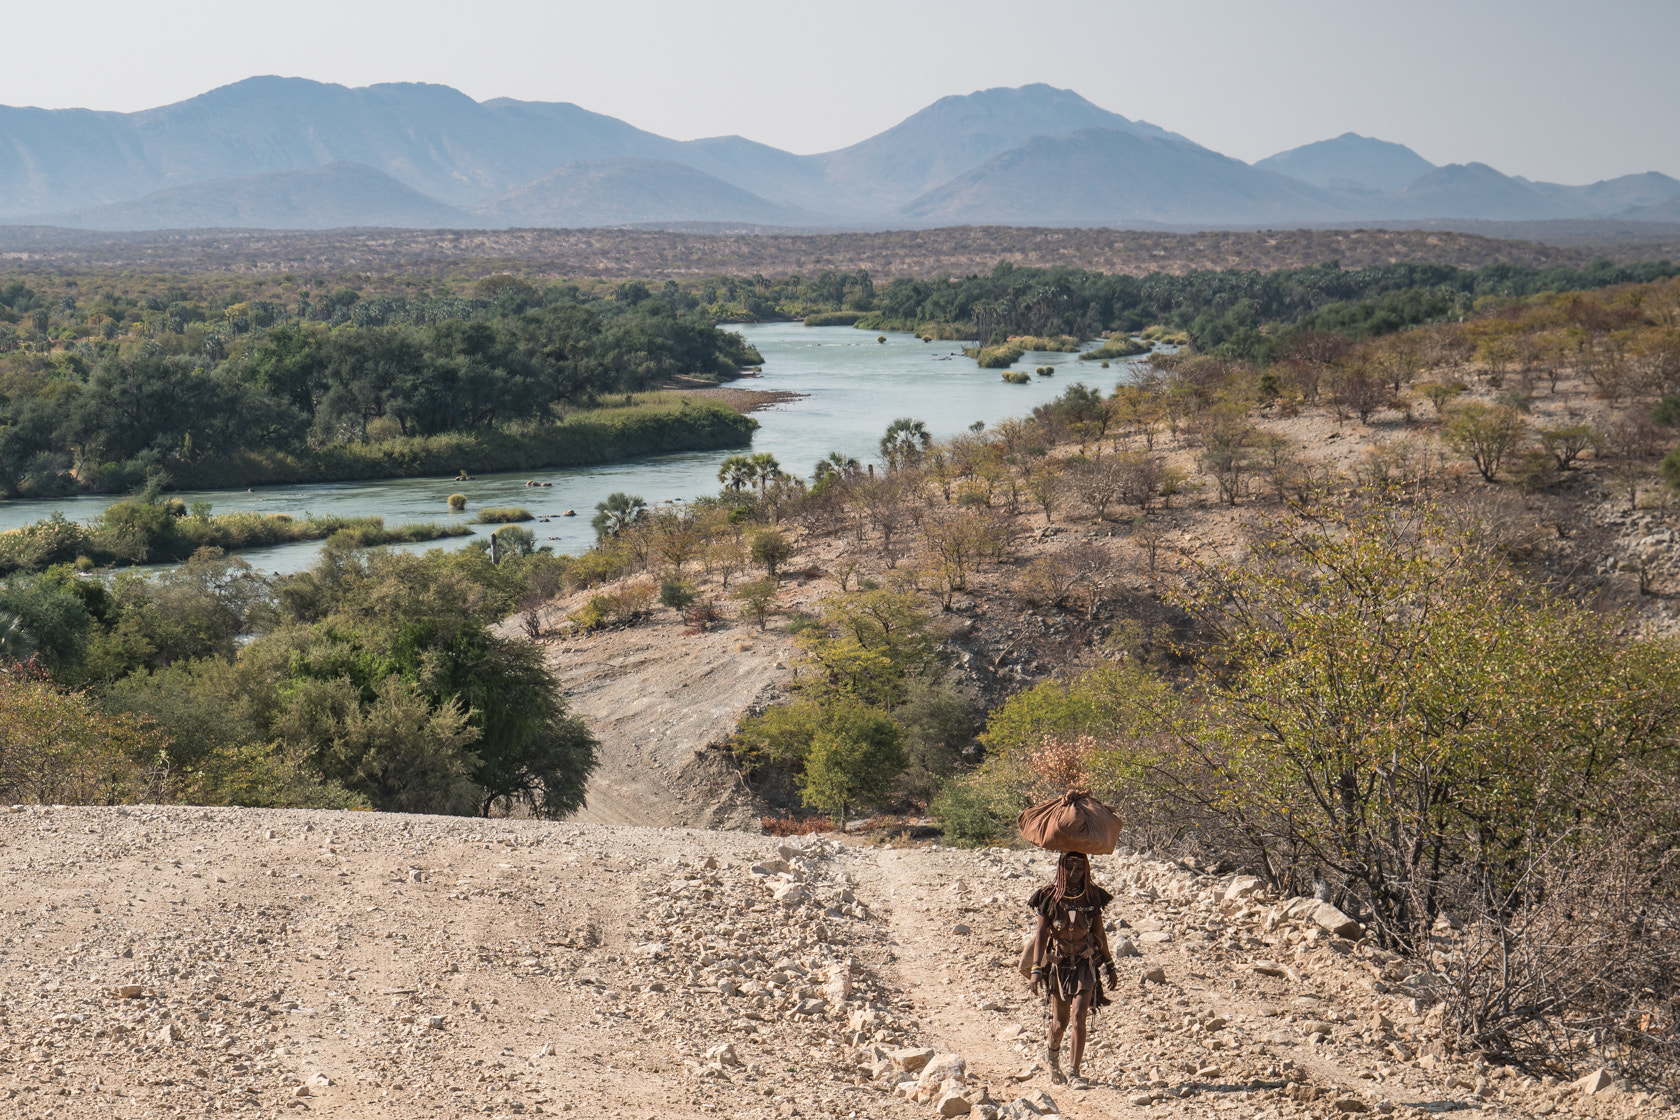 Sony a6300 sample photo. Carrying water, kunene river, namibia photography